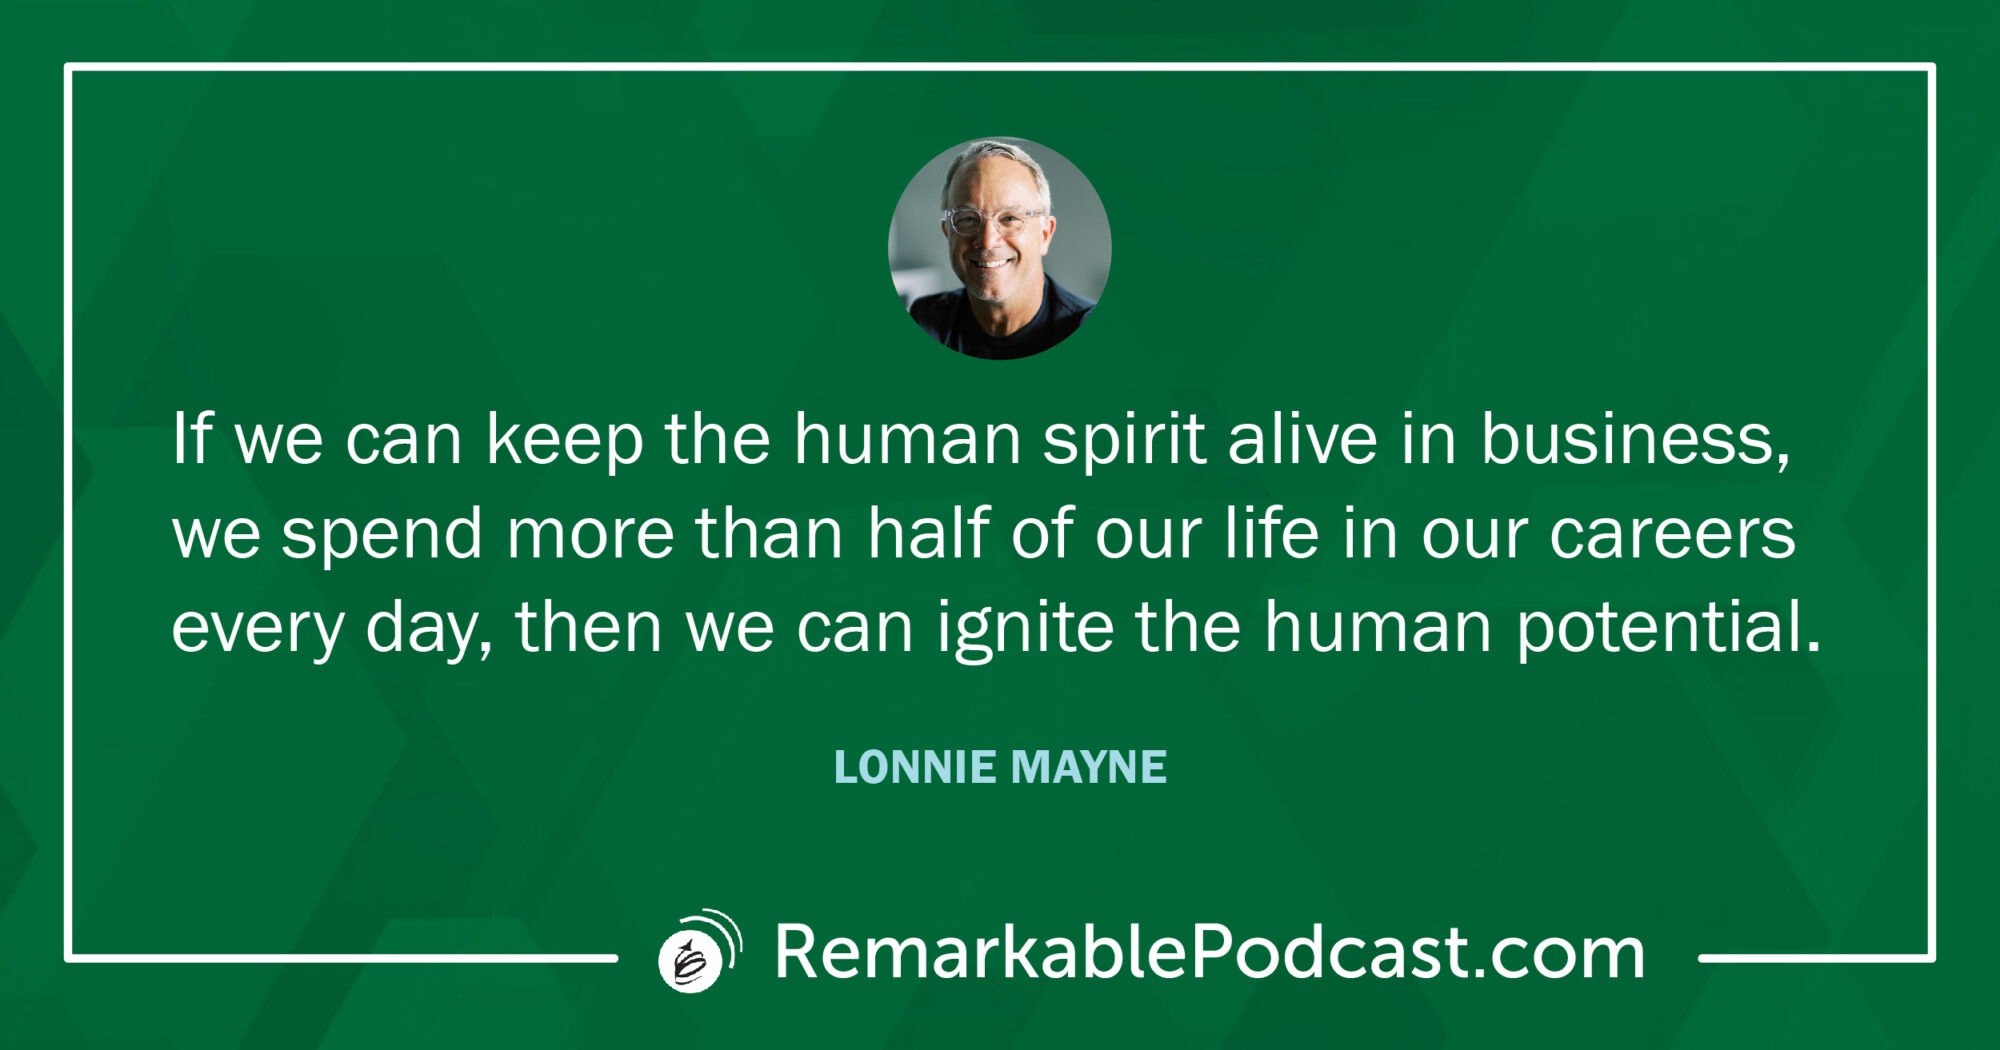 Quote Image: If we can keep the human spirit alive in business, we spend more than half of our life in our careers every day, then we can ignore the human potential. -Lonnie Mayne